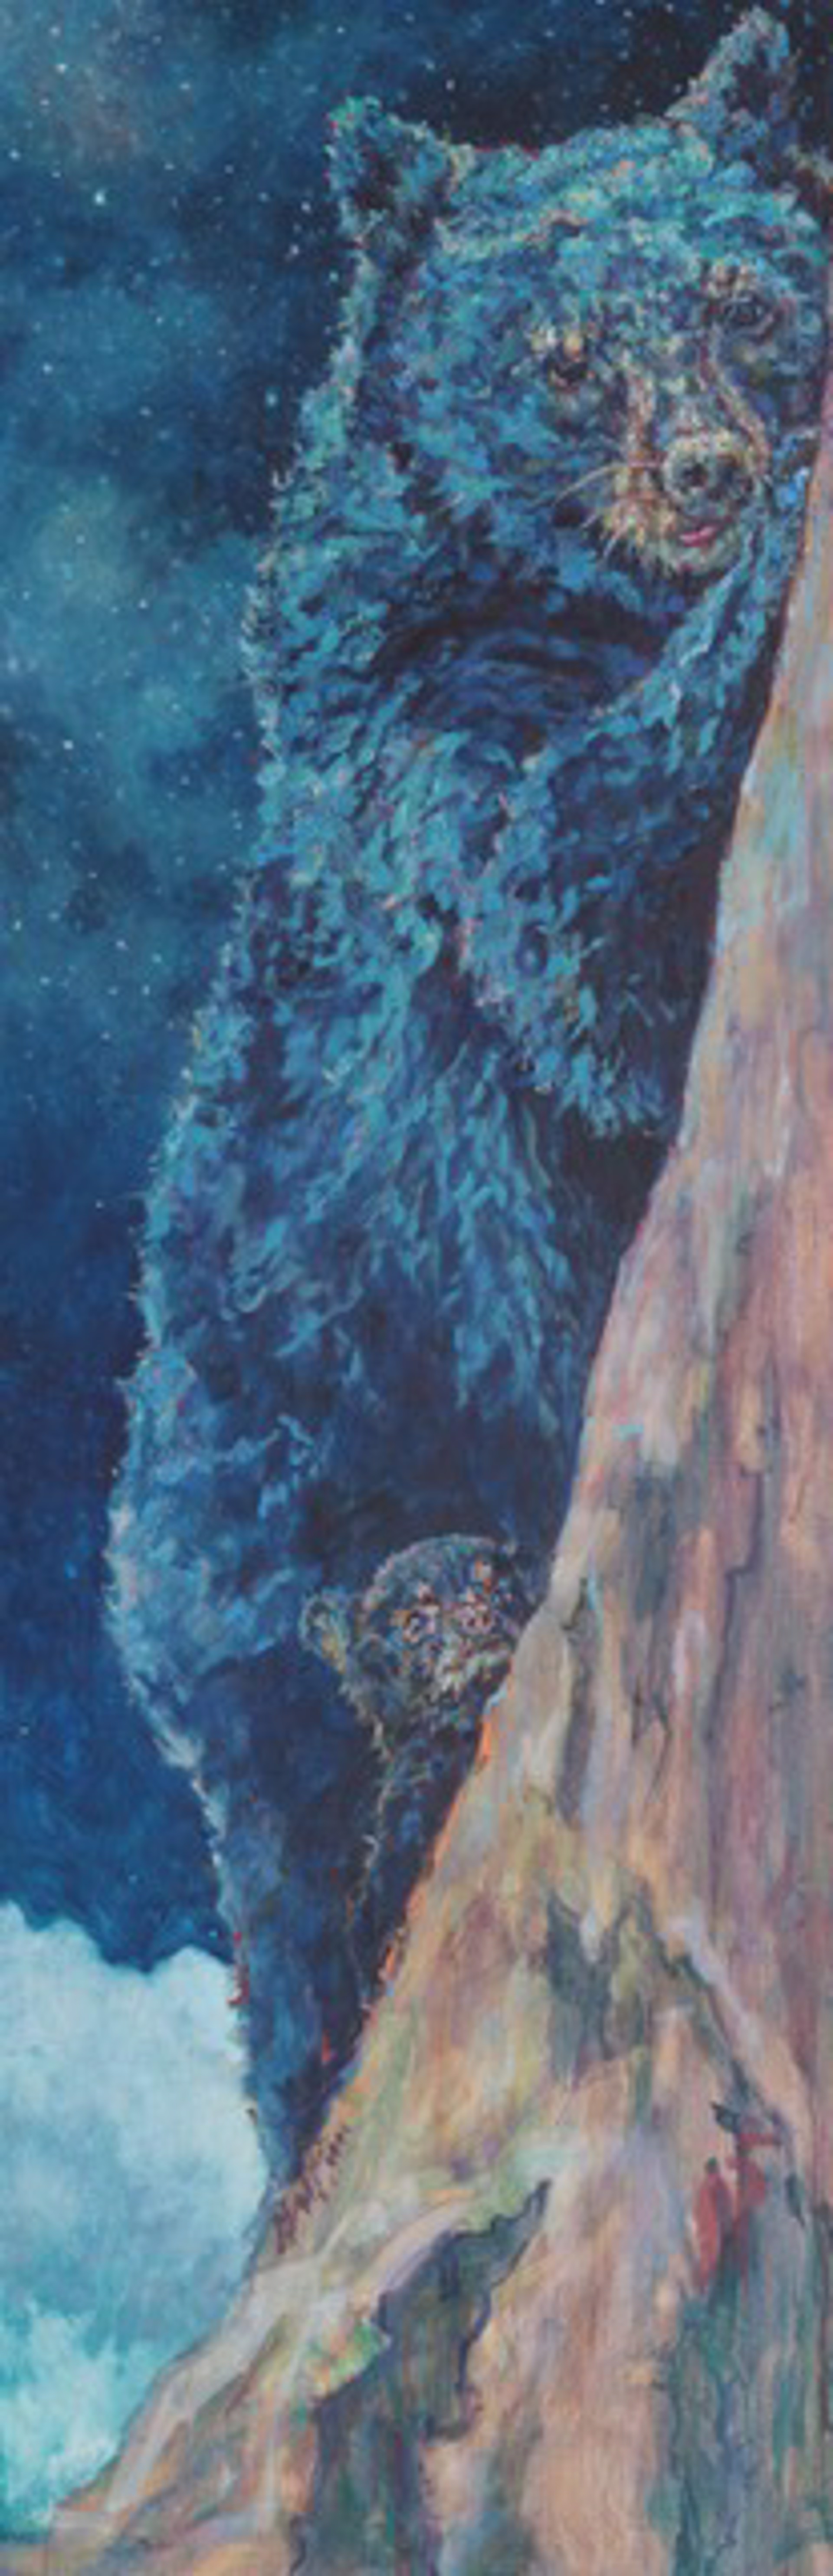 A Contemporary Oil Painting Of A Mother Black Bear And Cub On The Side Of A Tree, By Patricia Griffin